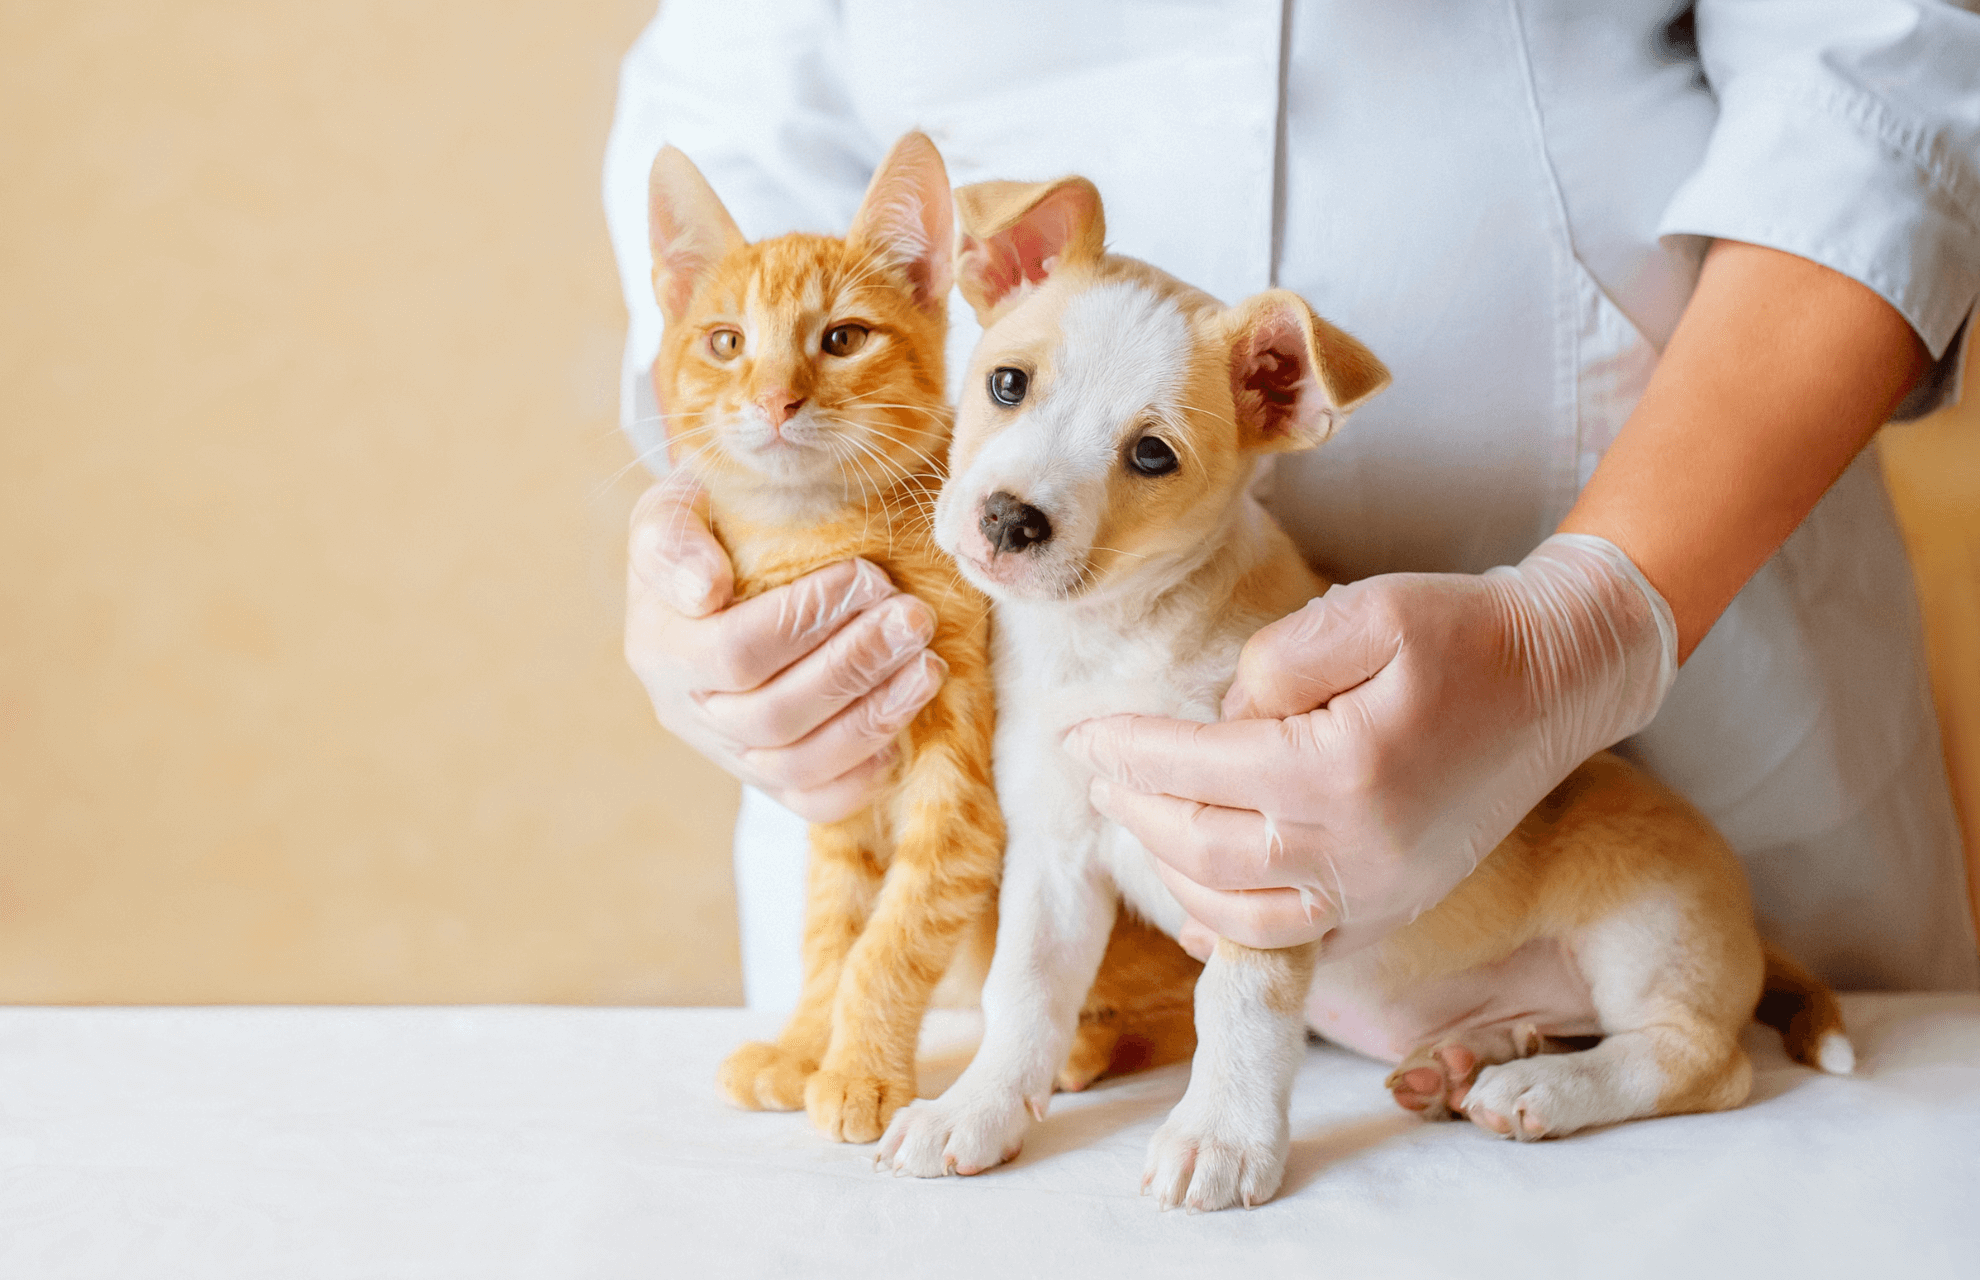 Vet holding a dog and a cat<br />
